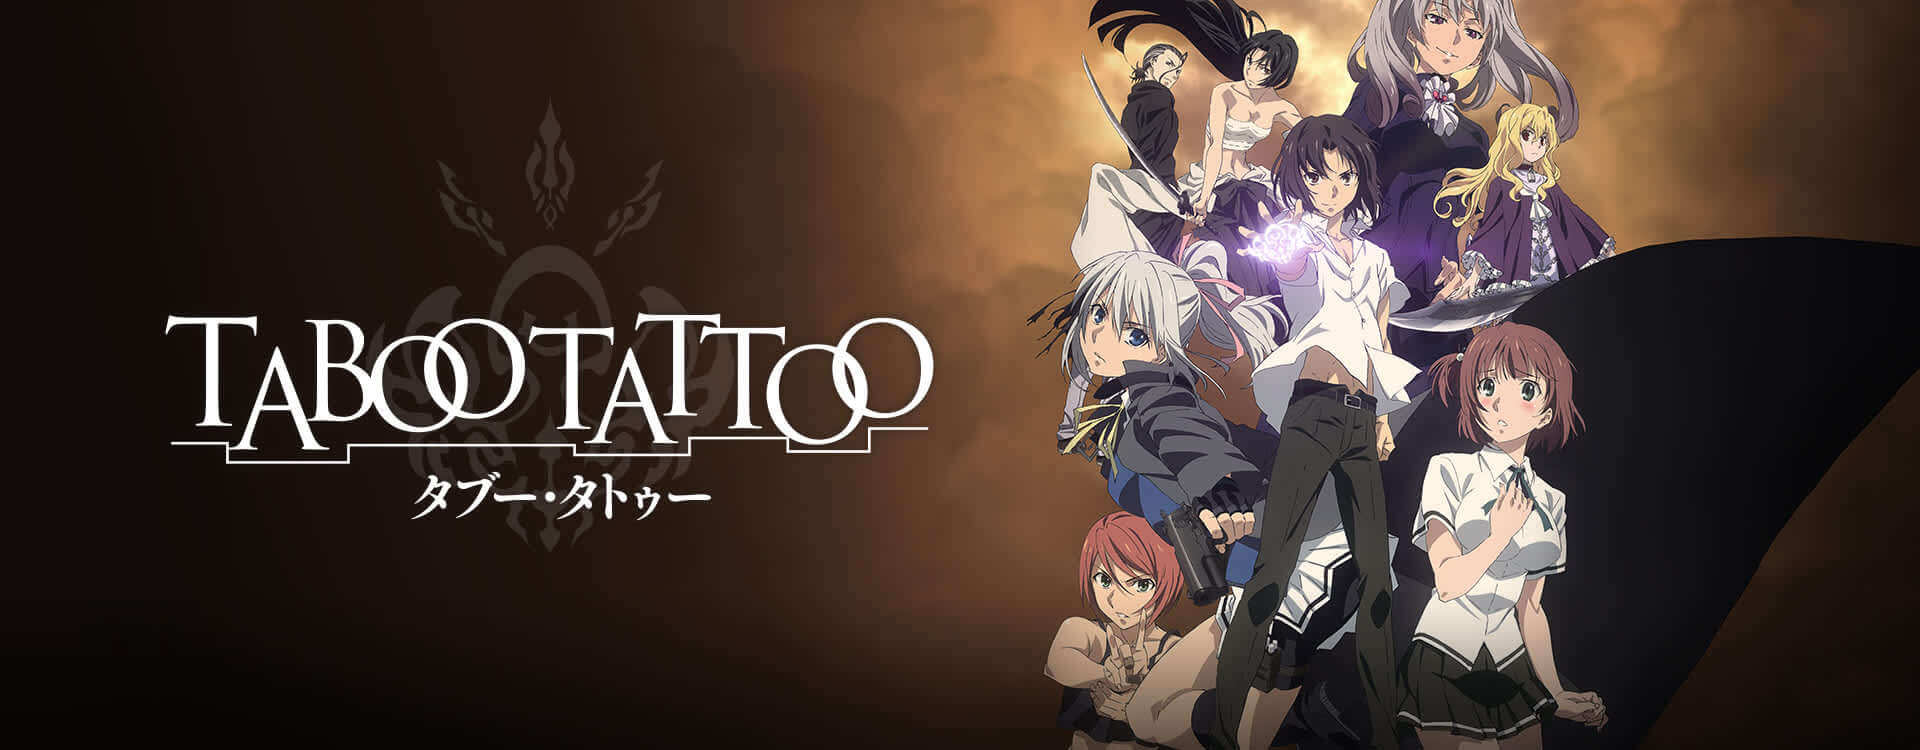 Opening & Ending Anime OST Taboo Tattoo 